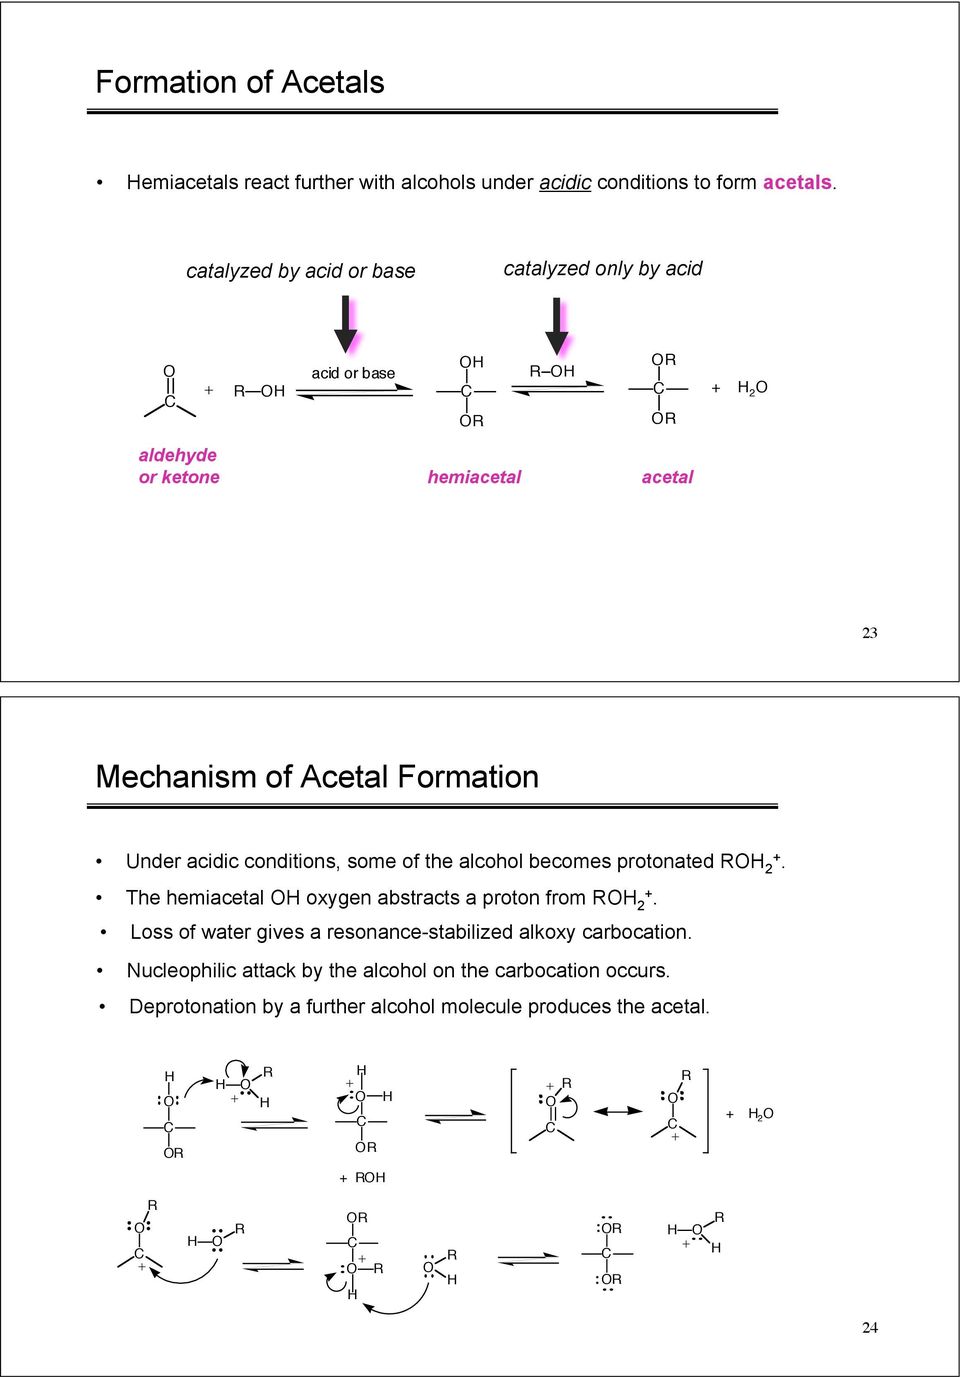 Under acidic conditions, some of the alcohol becomes protonated 2. The hemiacetal oxygen abstracts a proton from 2.